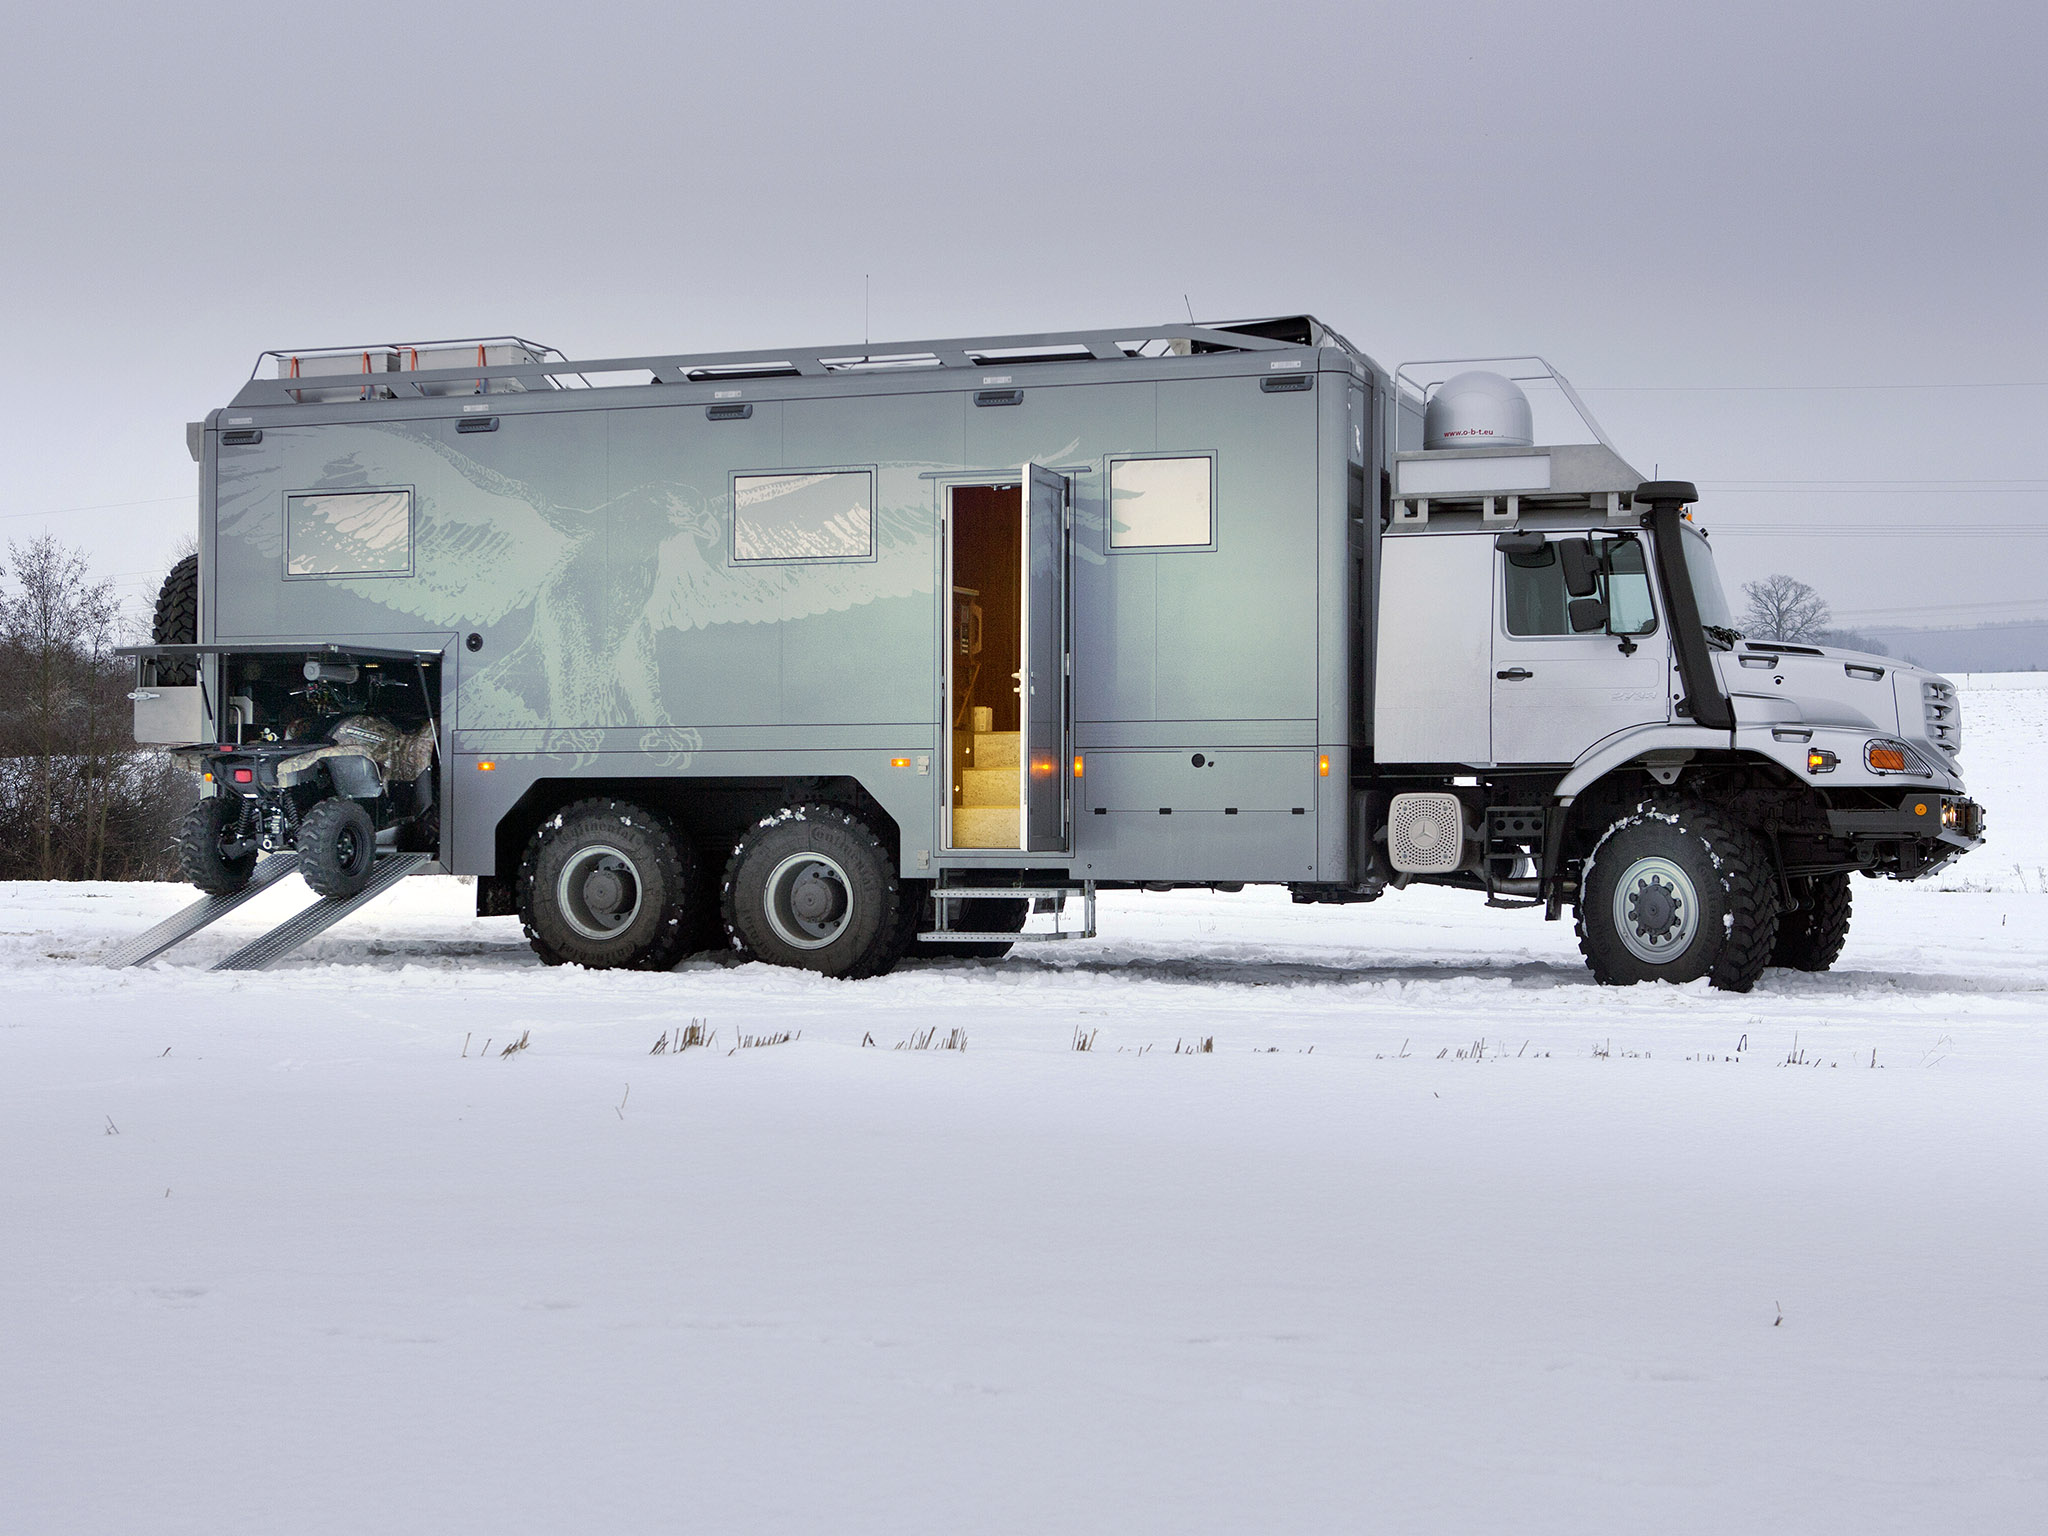 Expedition Vehicle Offroad Motorhome Camper G Wallpaper Background